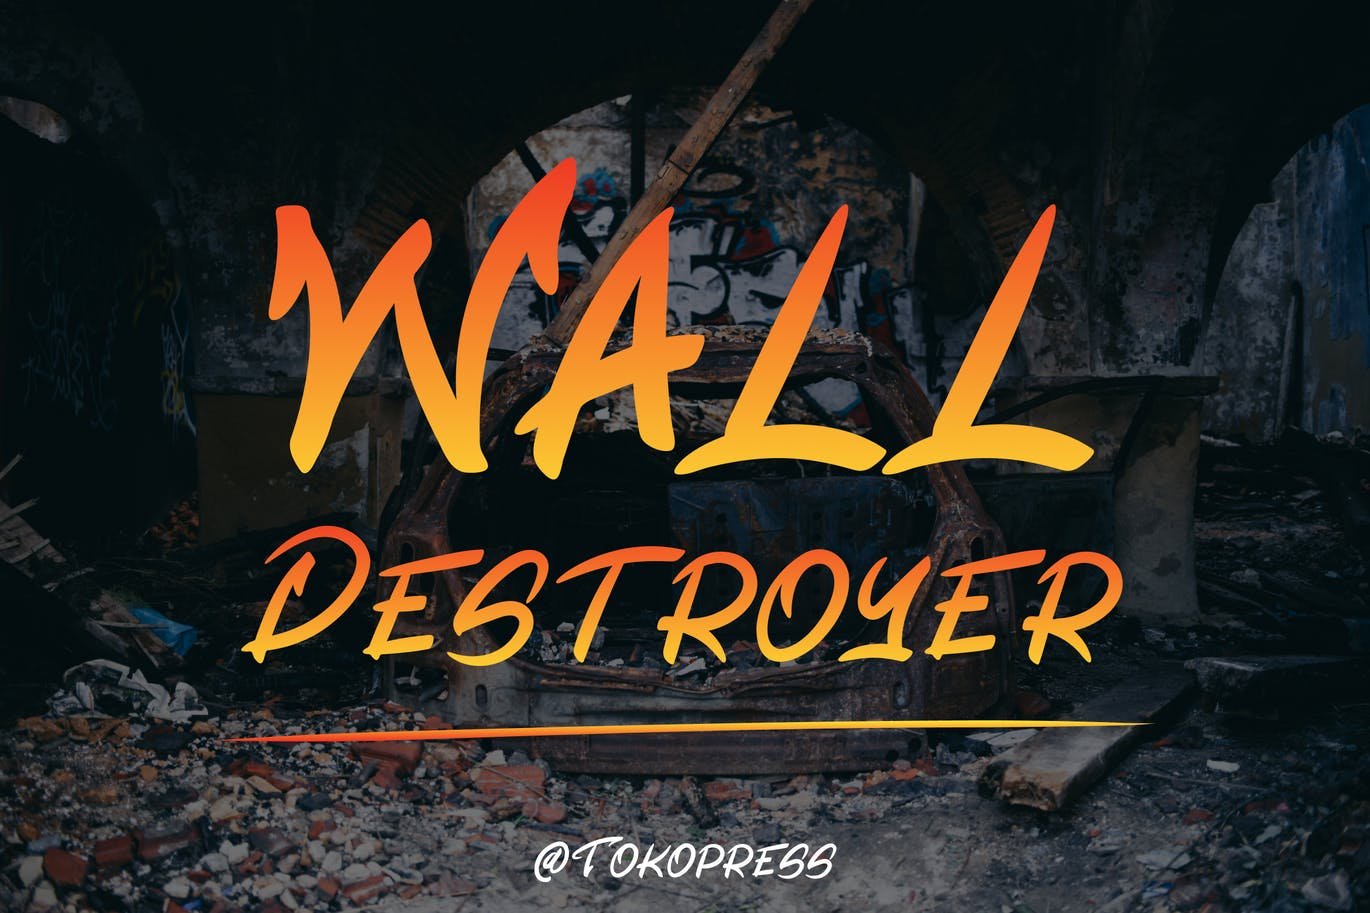 Wall Destroyer - Action Font cover image.